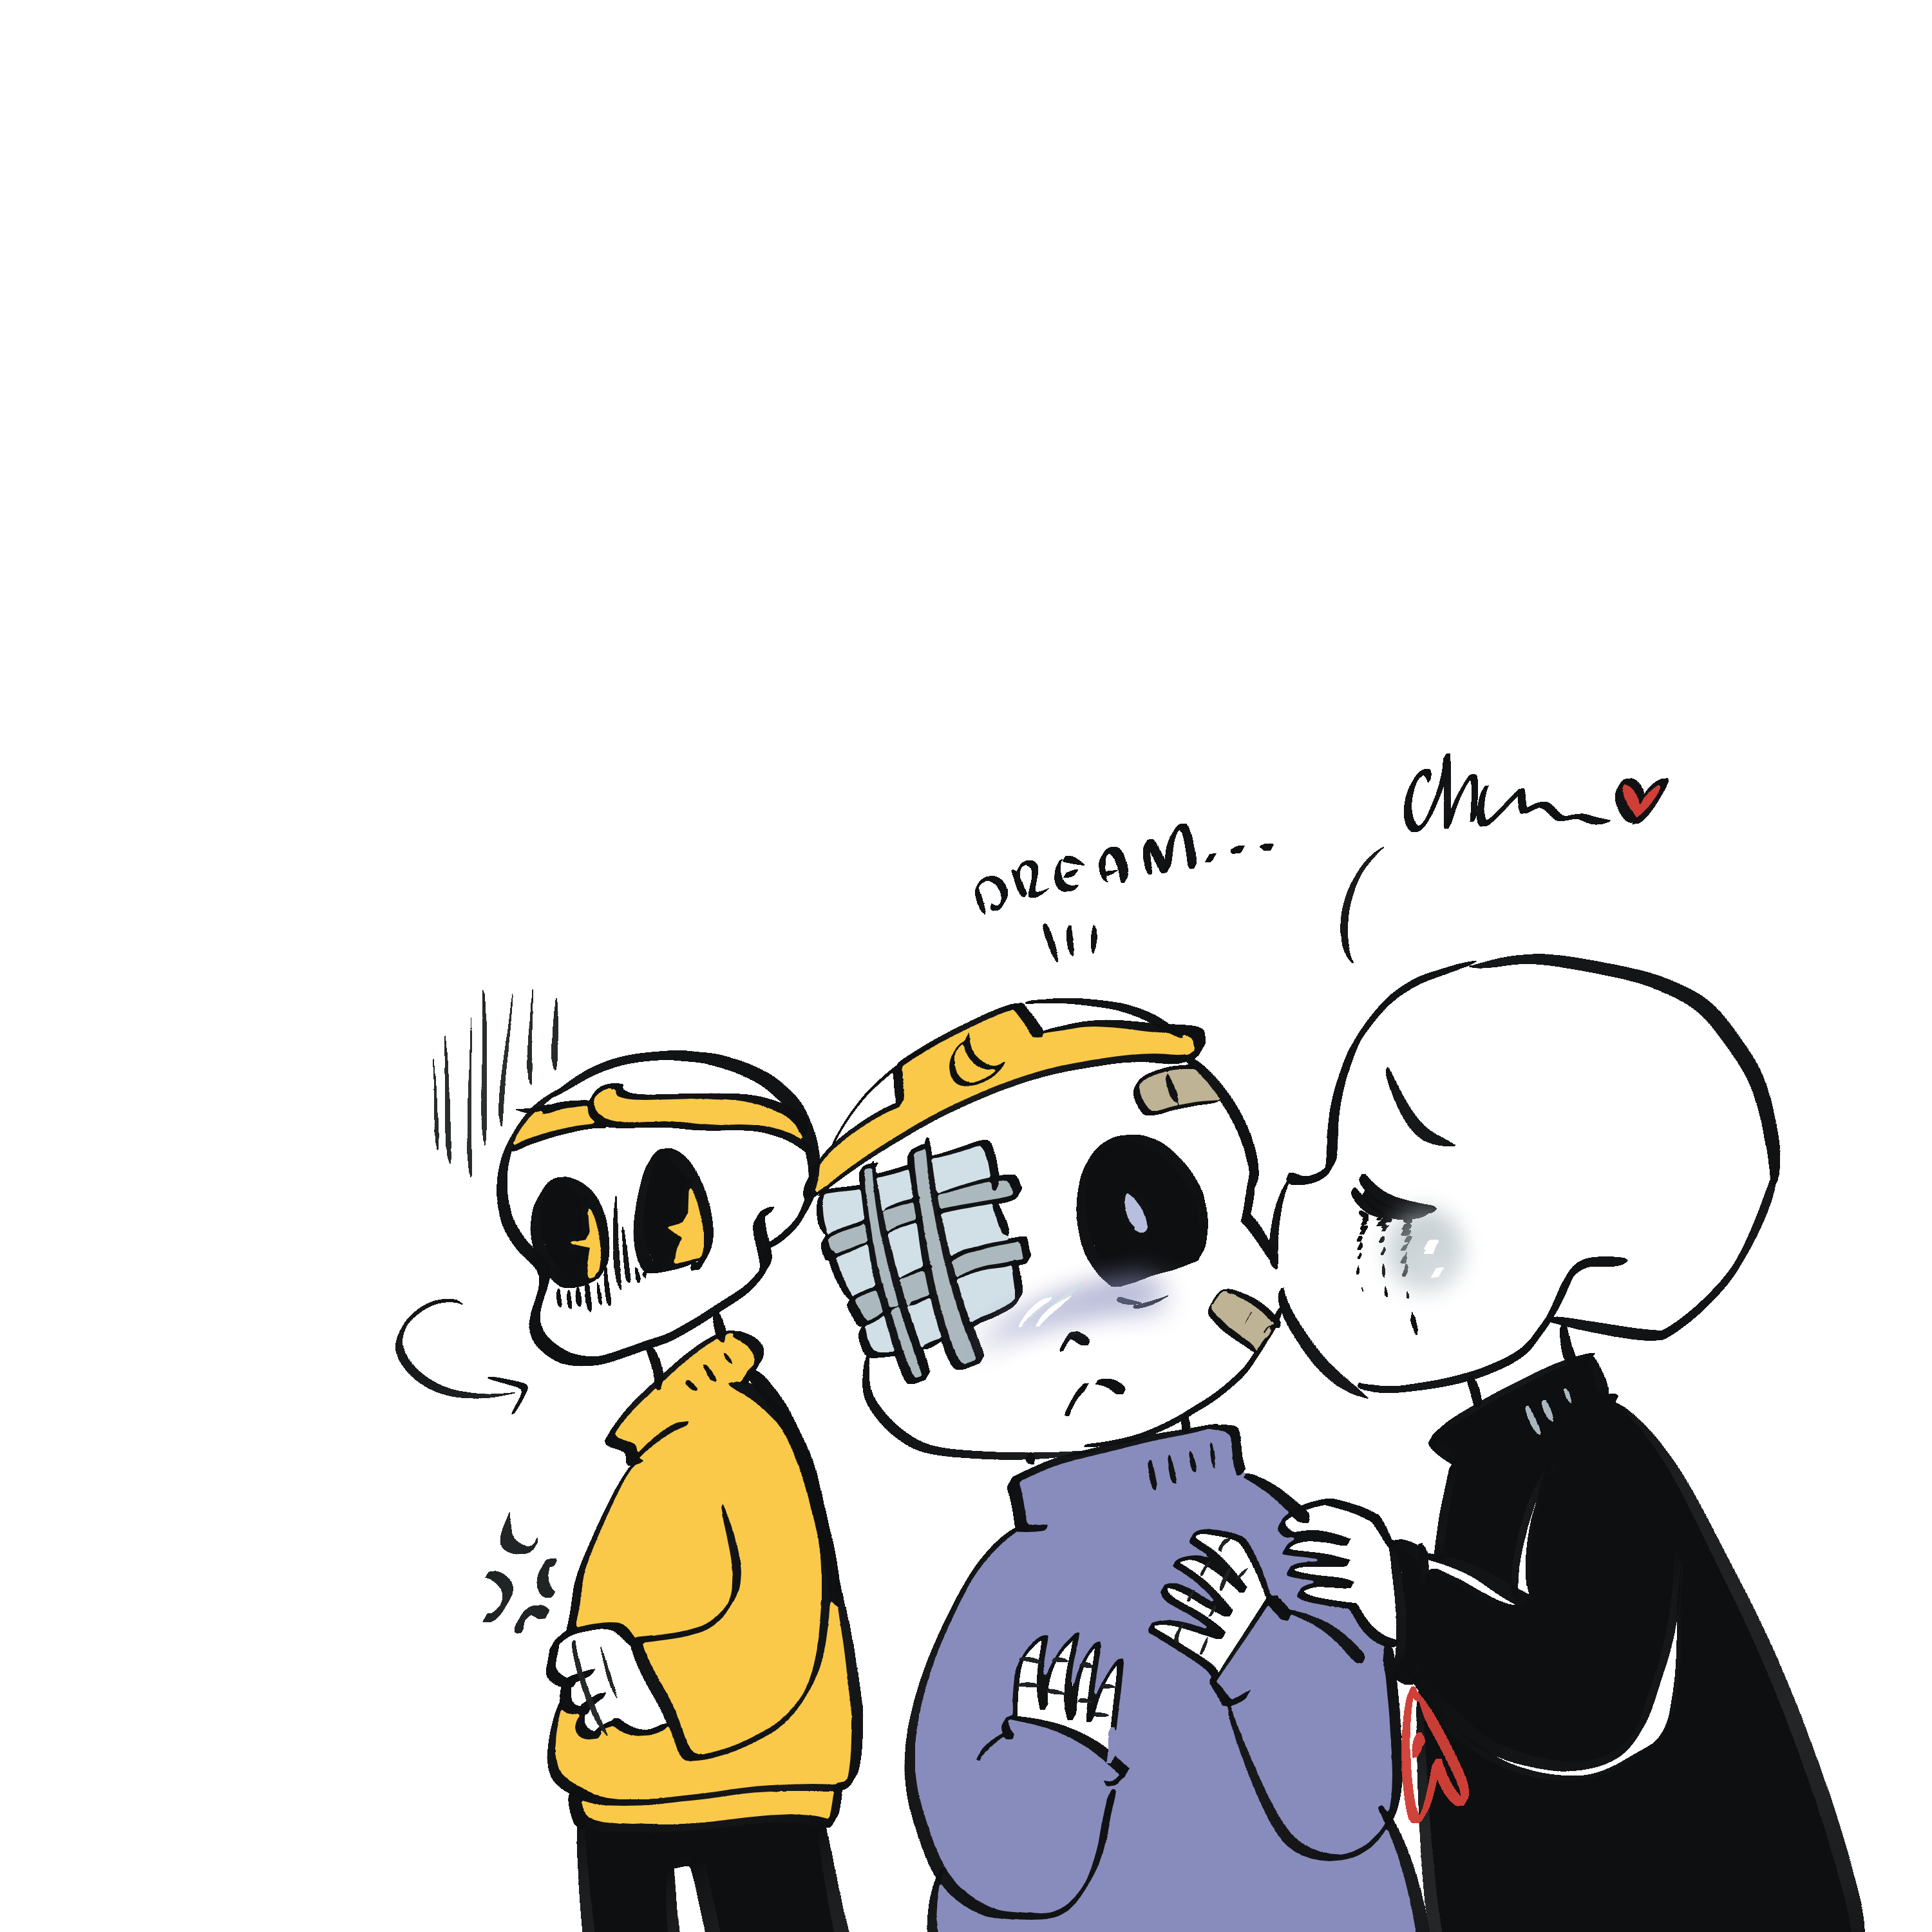 AU Sans Of The Day: Dream and Nightmare Sans